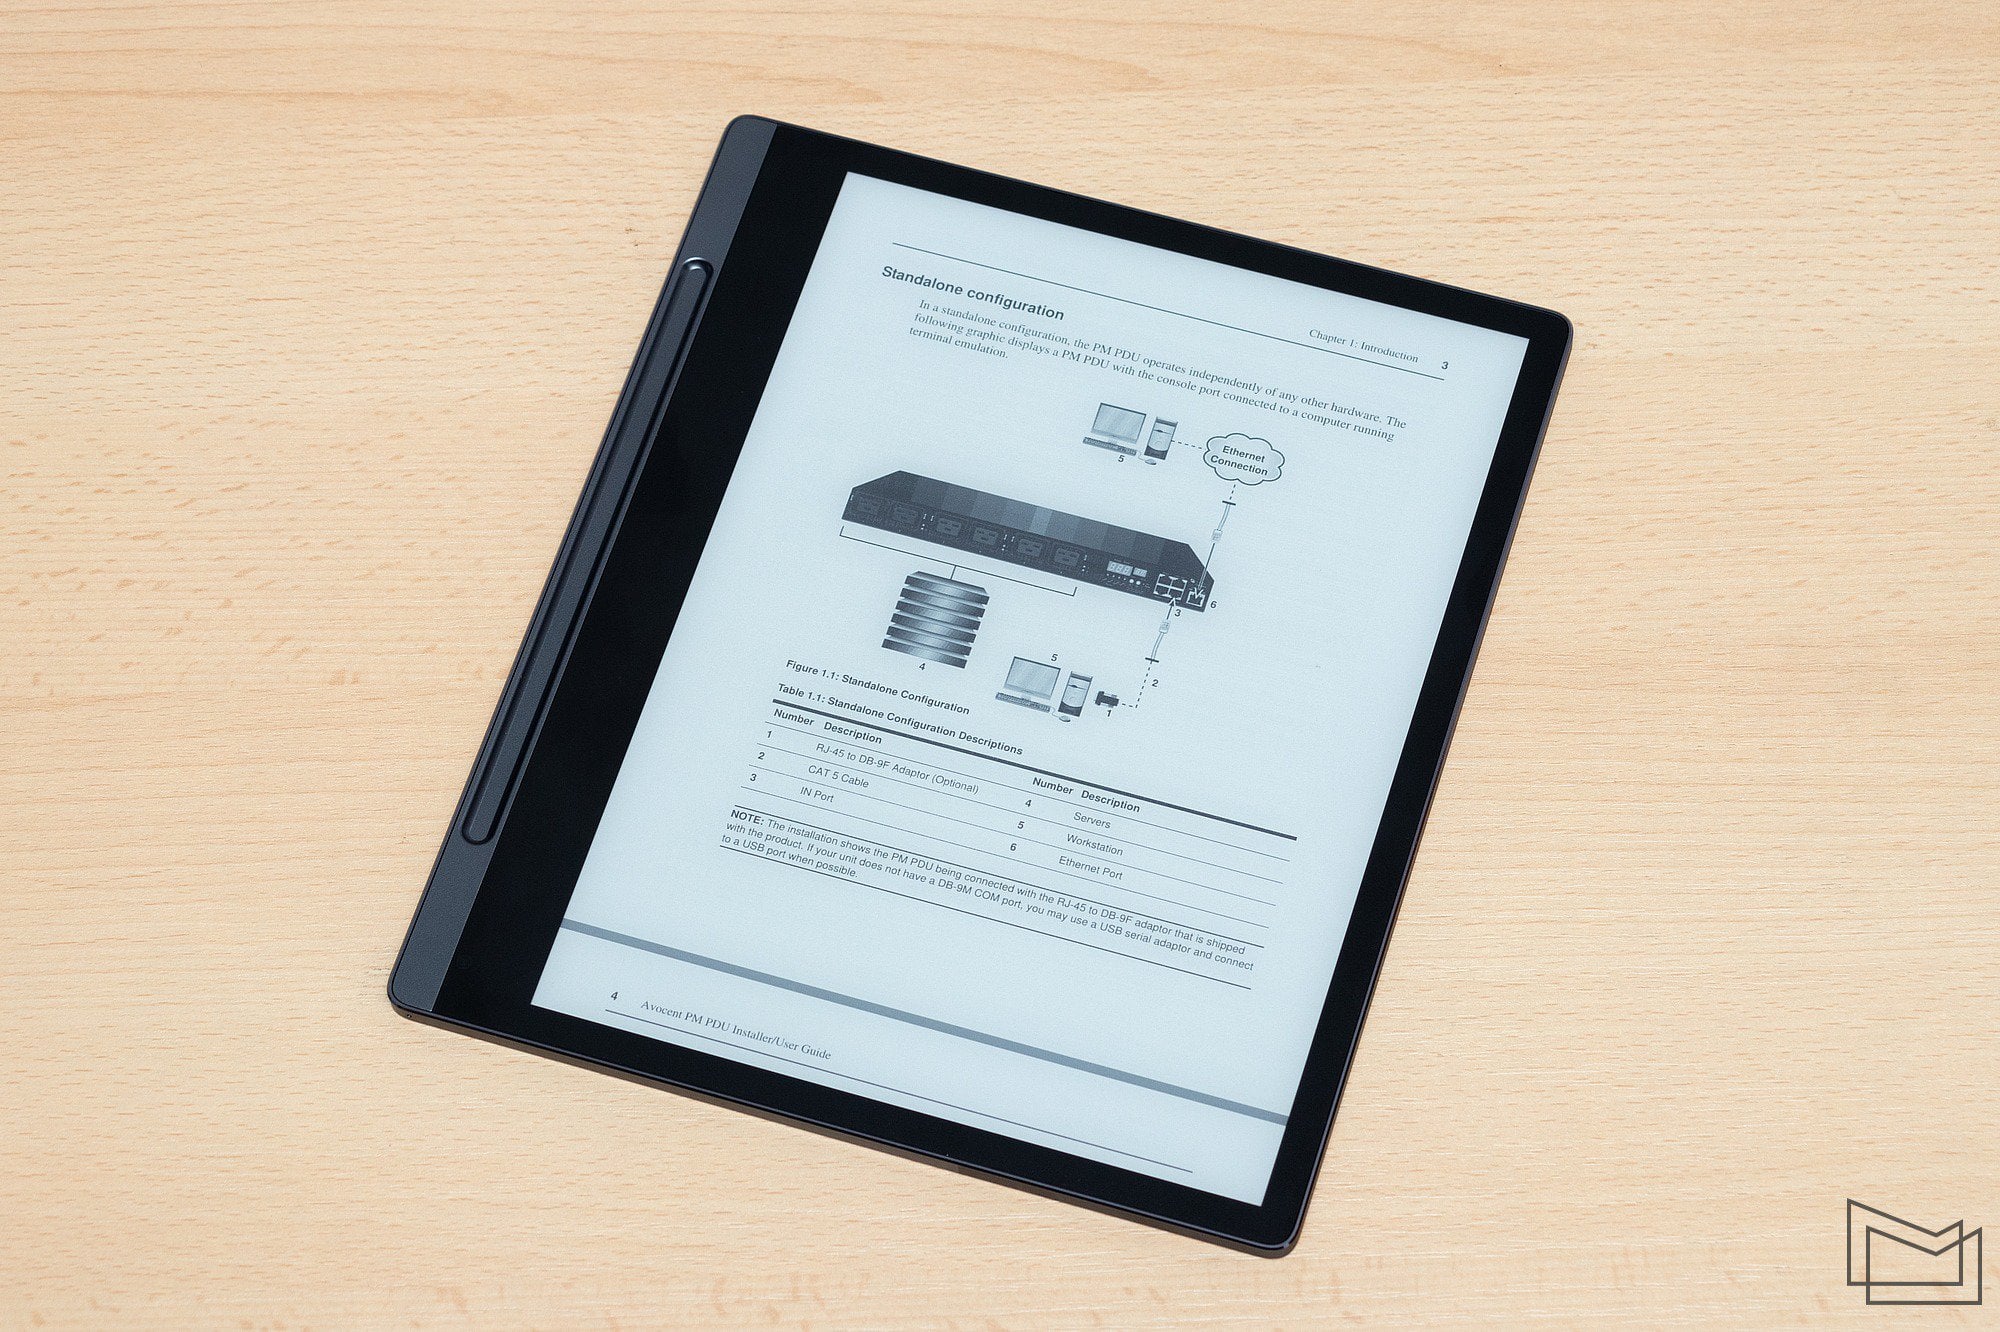 Lenovo Smart Paper review: A solid e-ink tablet spoiled by the cost